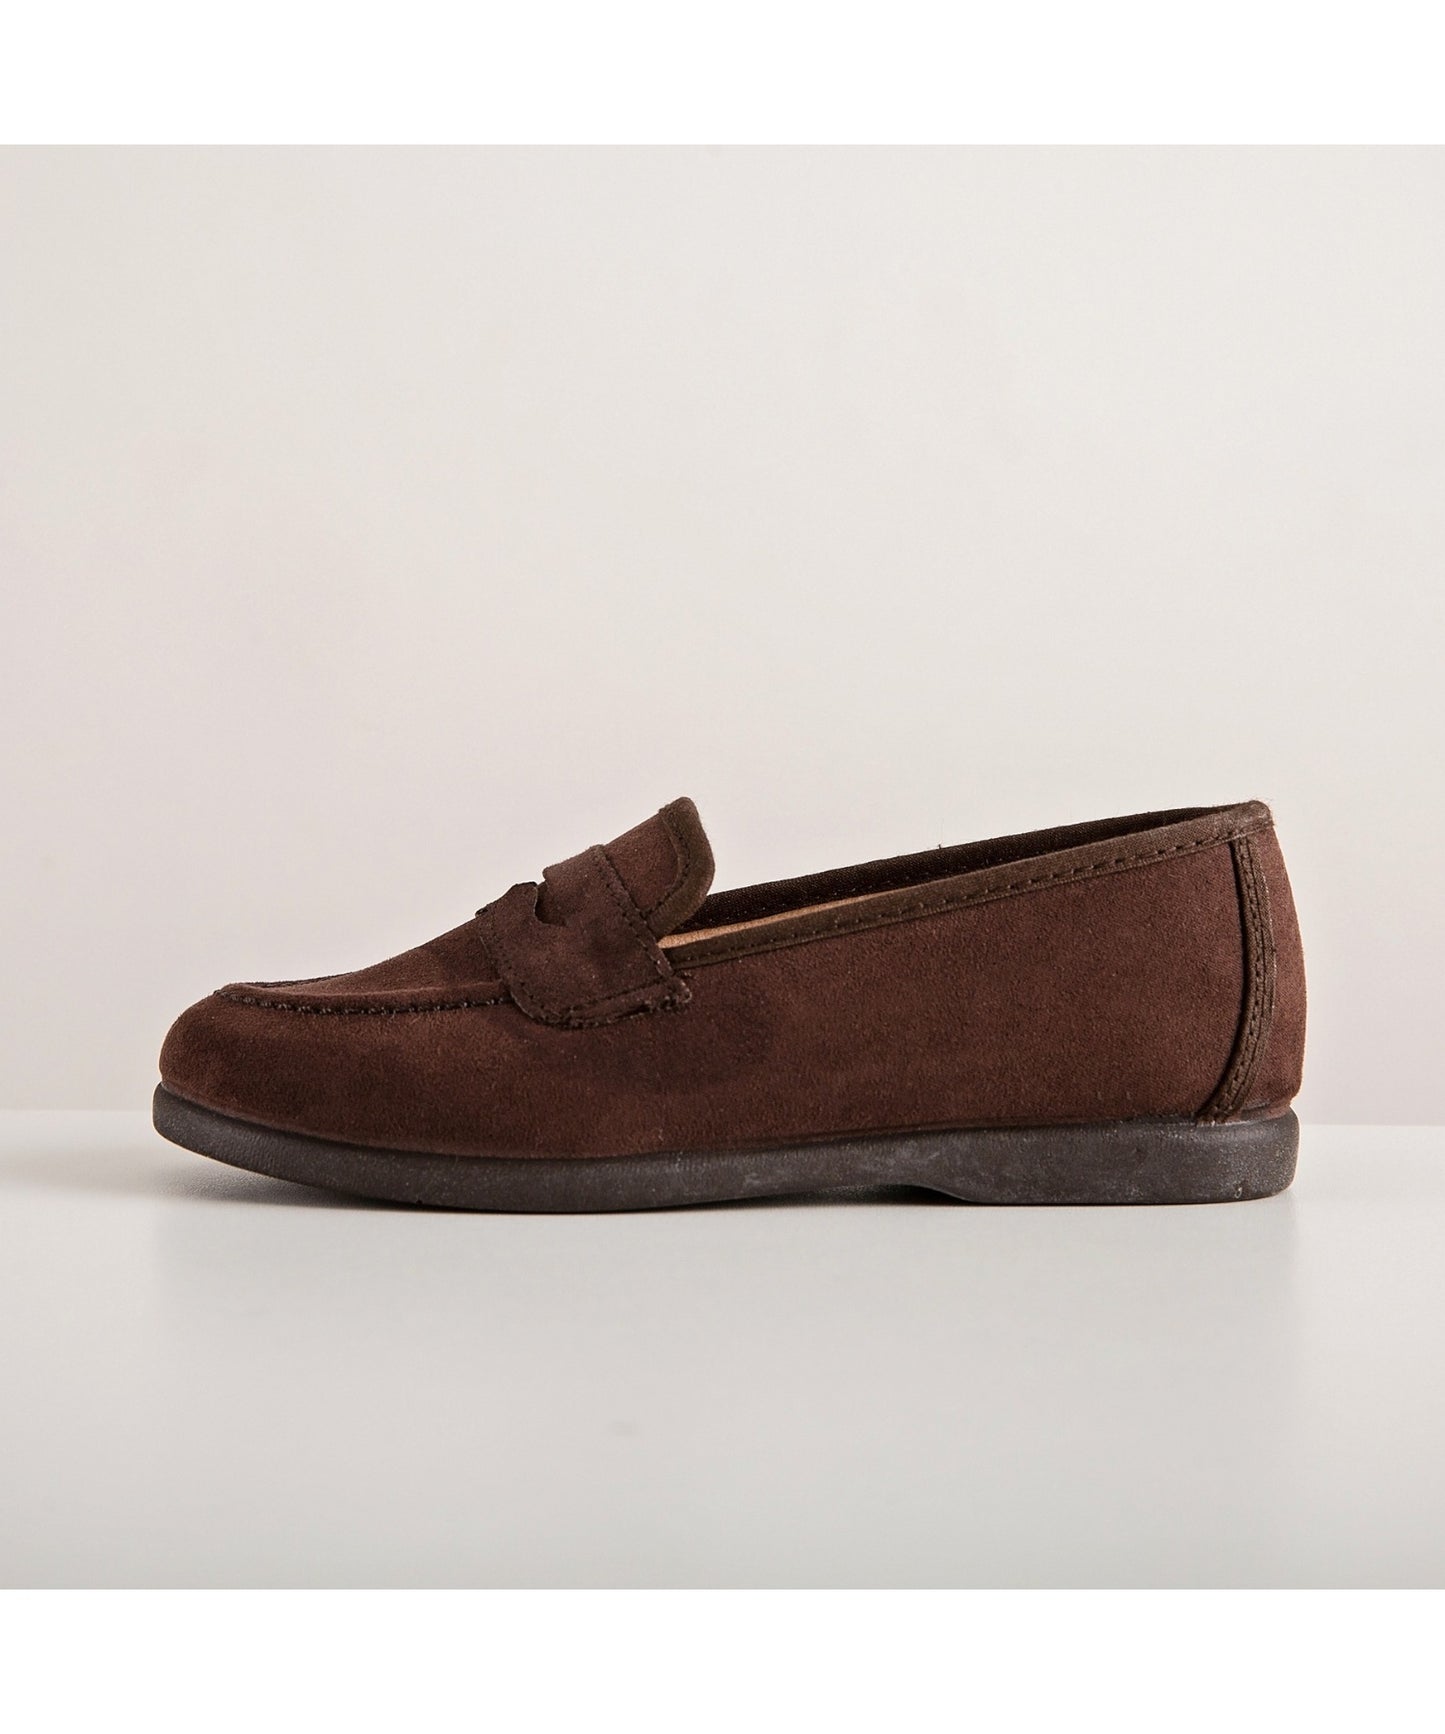 Boys Moccasin Pageboy Shoes - Brown